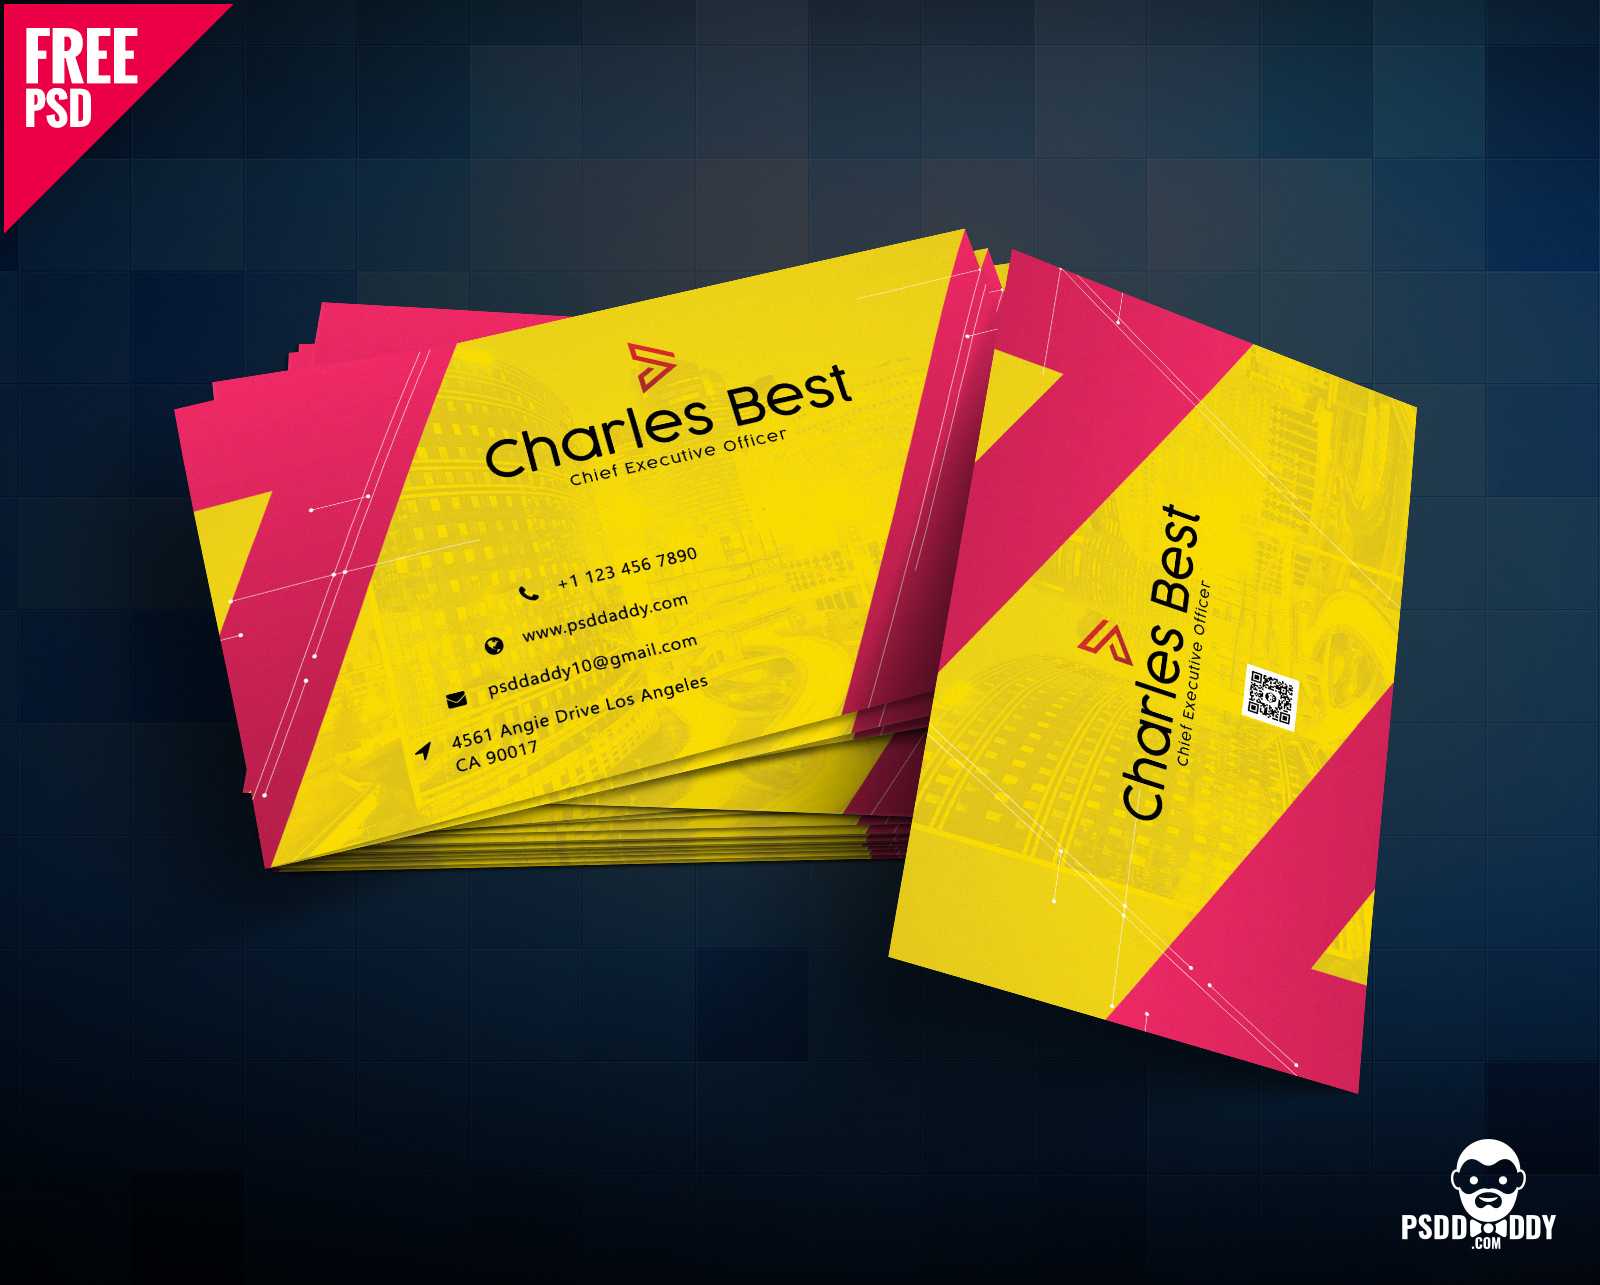 Download] Creative Business Card Free Psd | Psddaddy Throughout Visiting Card Template Psd Free Download